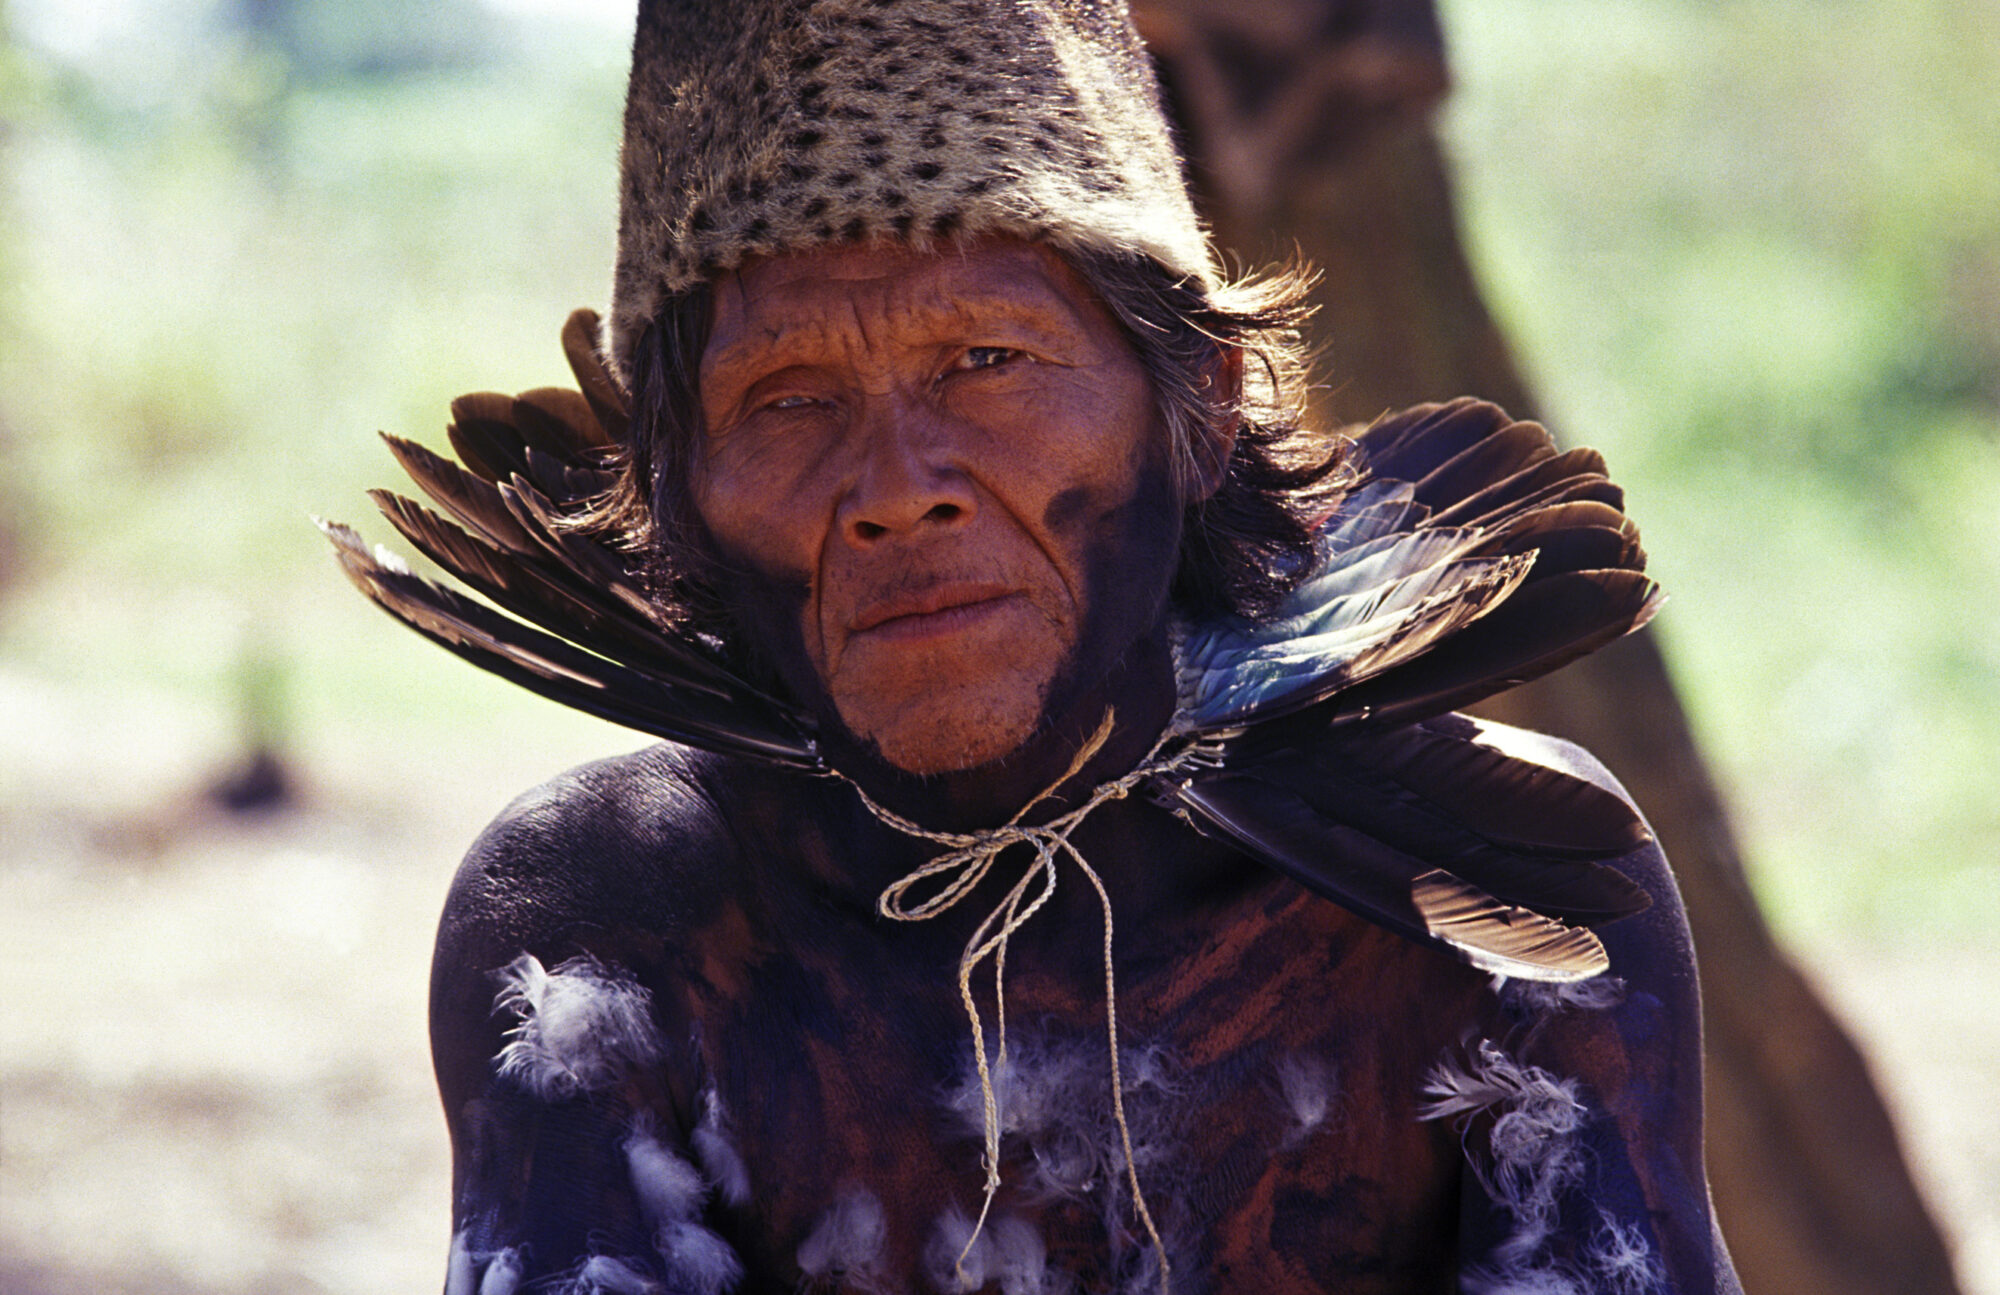 An Ayoreo Indigenous man in traditional attire